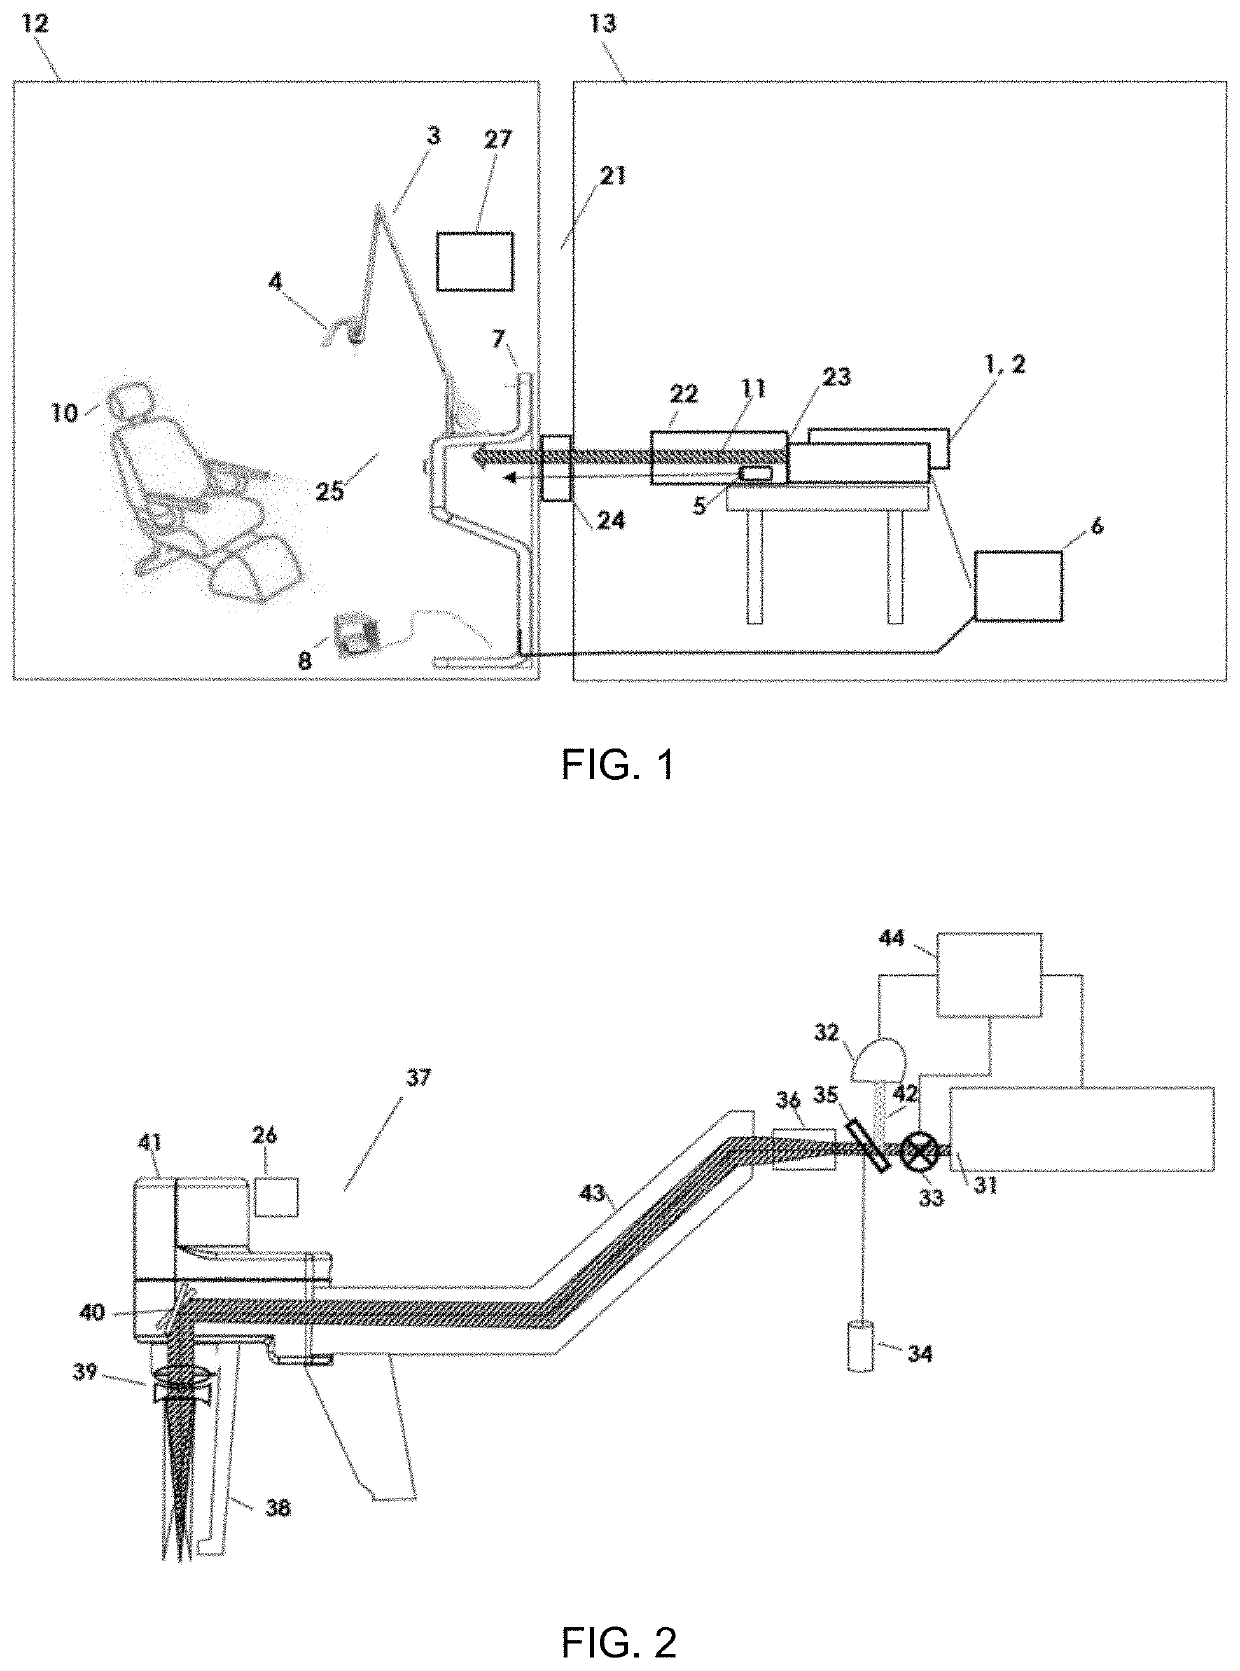 Methods and apparatus for removal of skin pigmentation and tattoo ink